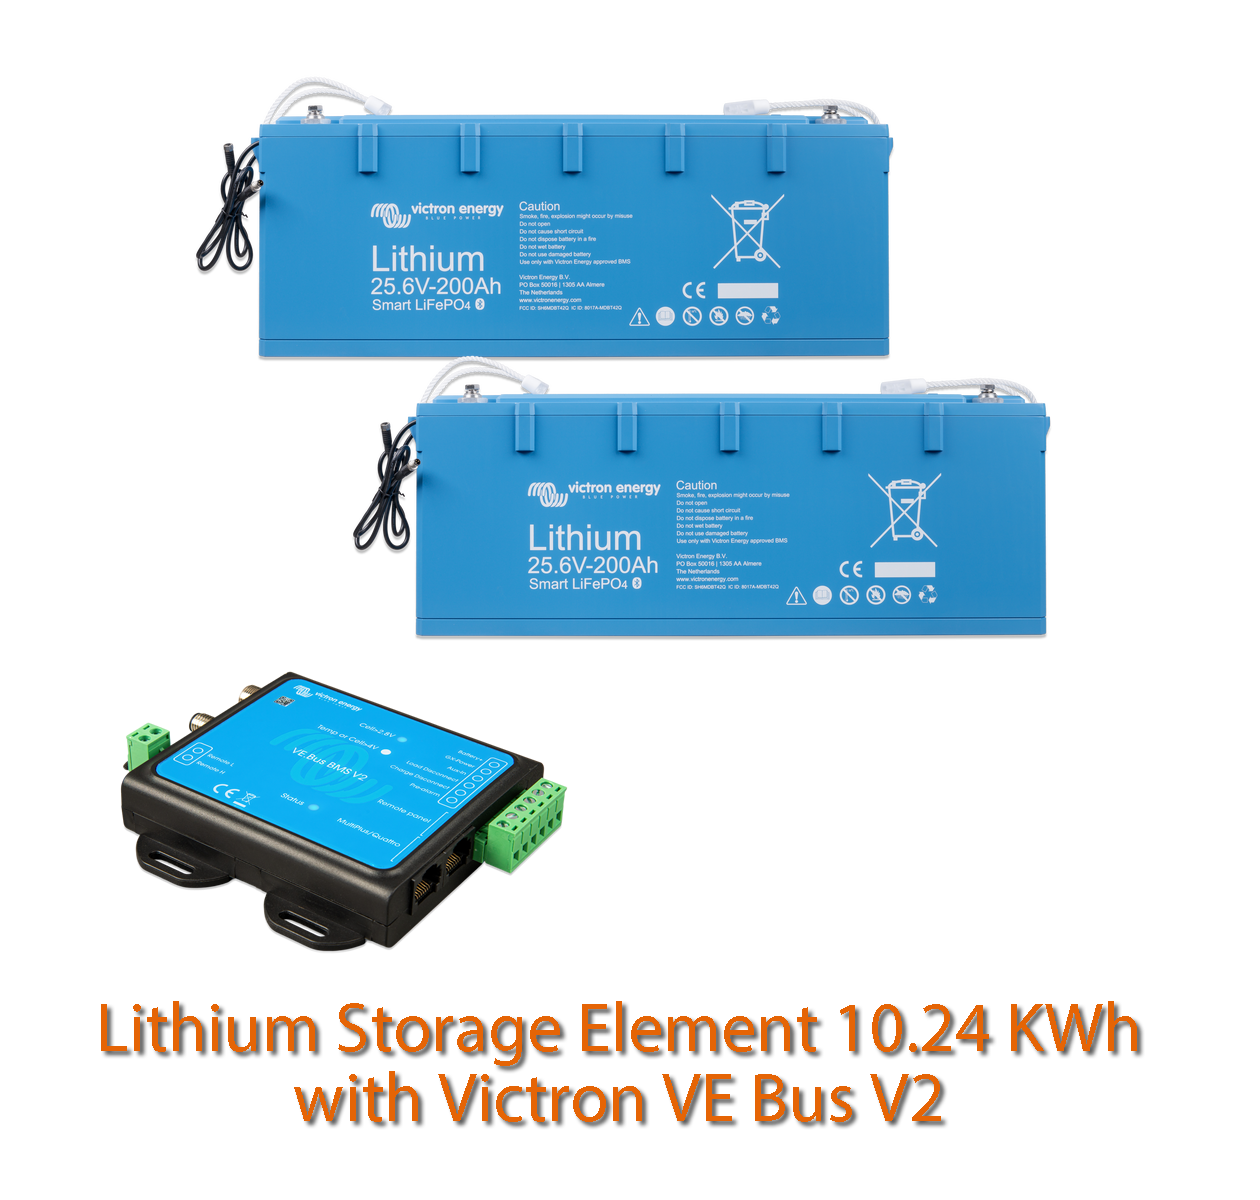 Victron ESS Lithium Battery 48V 10.24 KWh Energy Storage Element